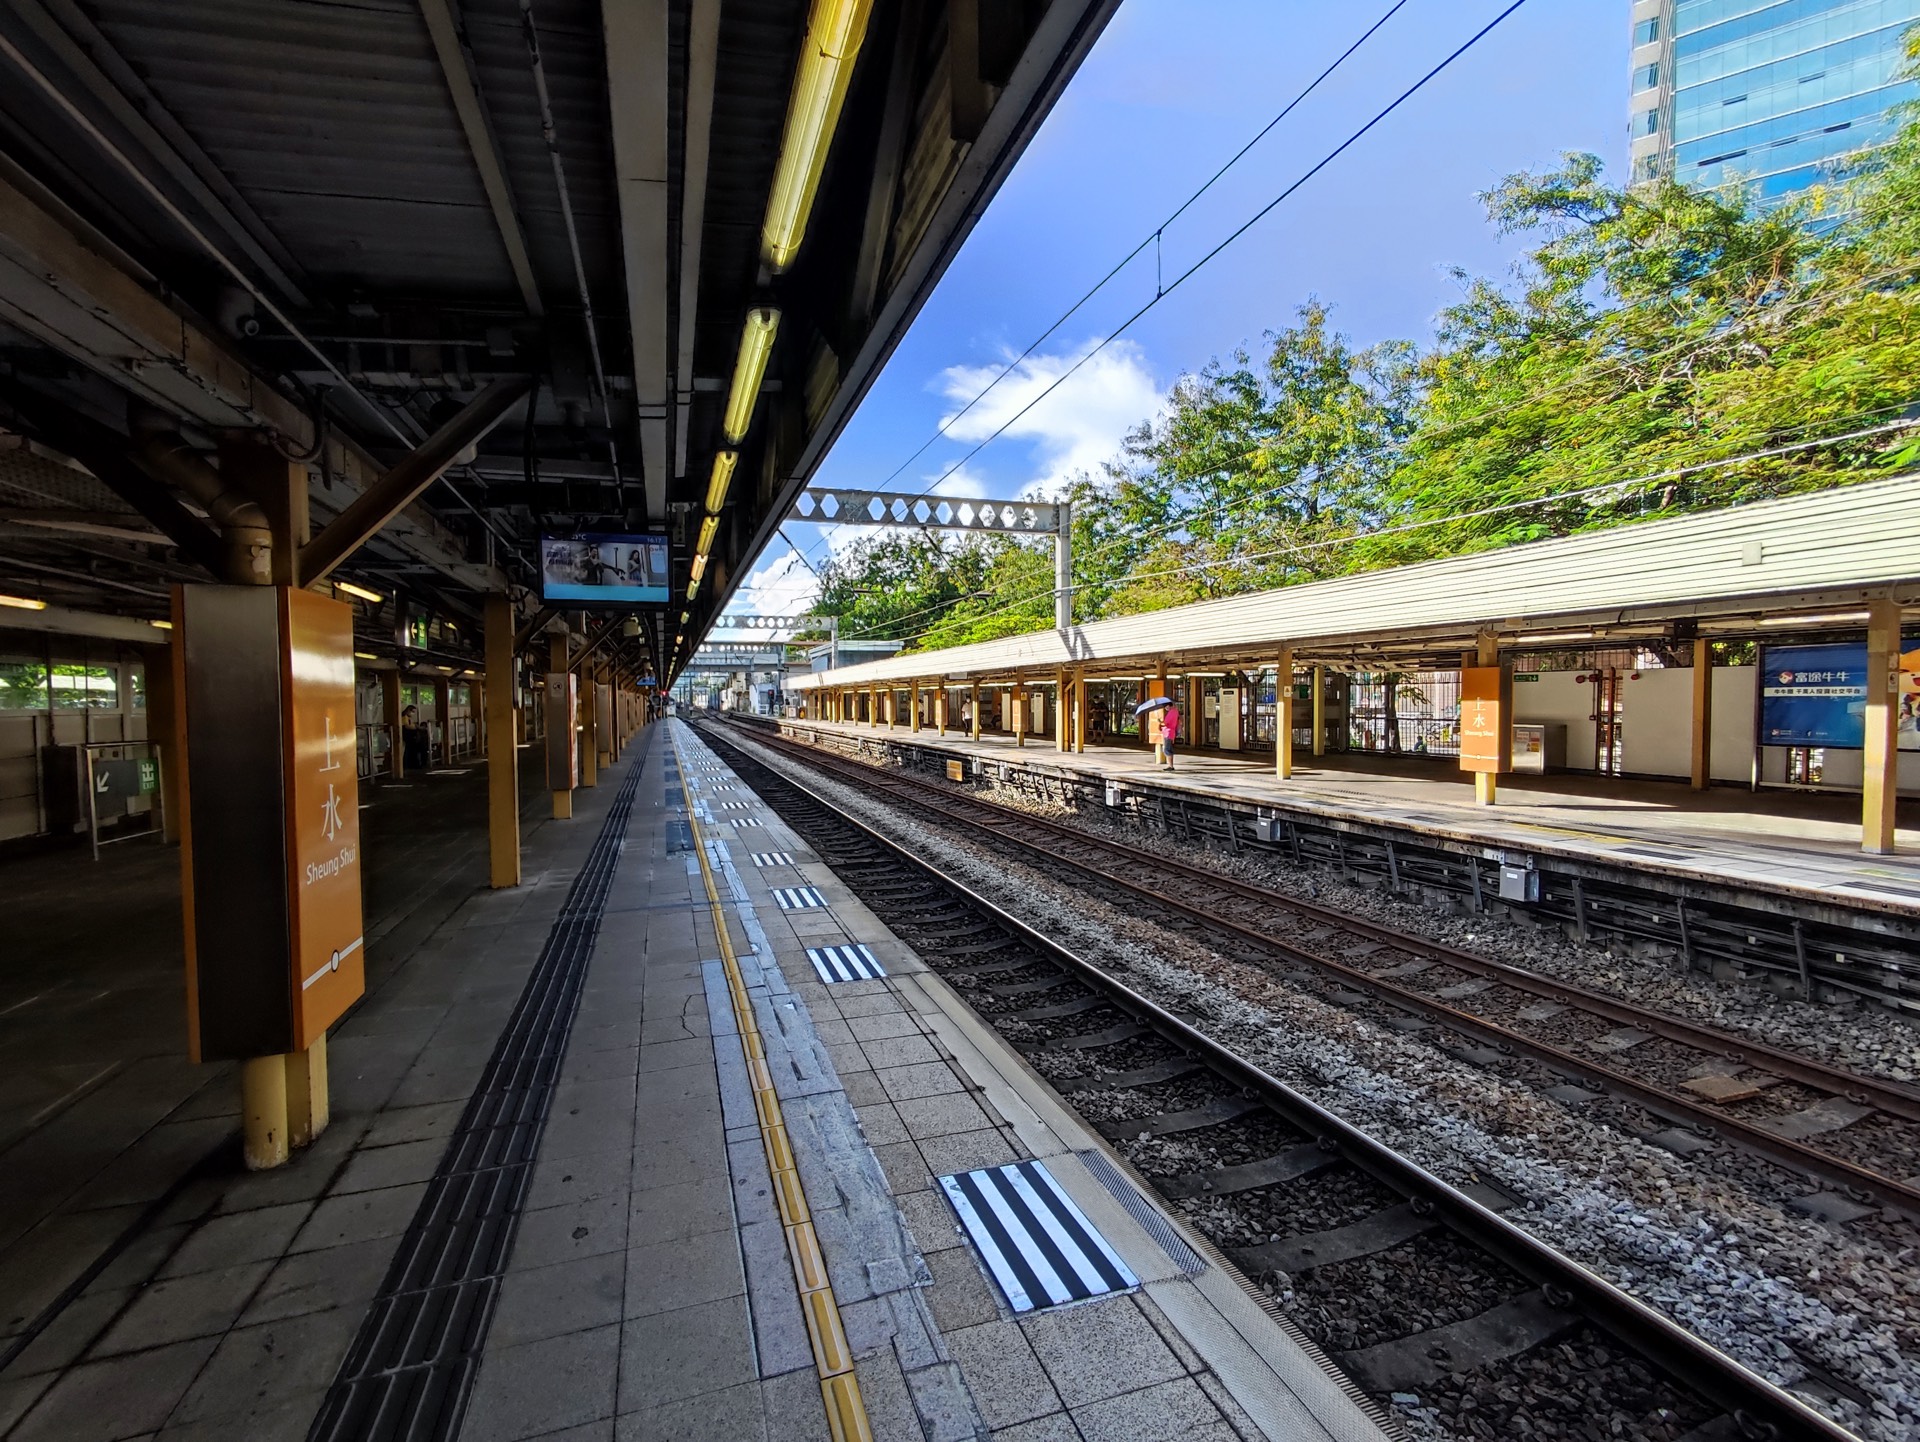 Sheung Shui Station, due to the border closure, it has become the north-bound terminus of the East Rail Line, and the platform is empty